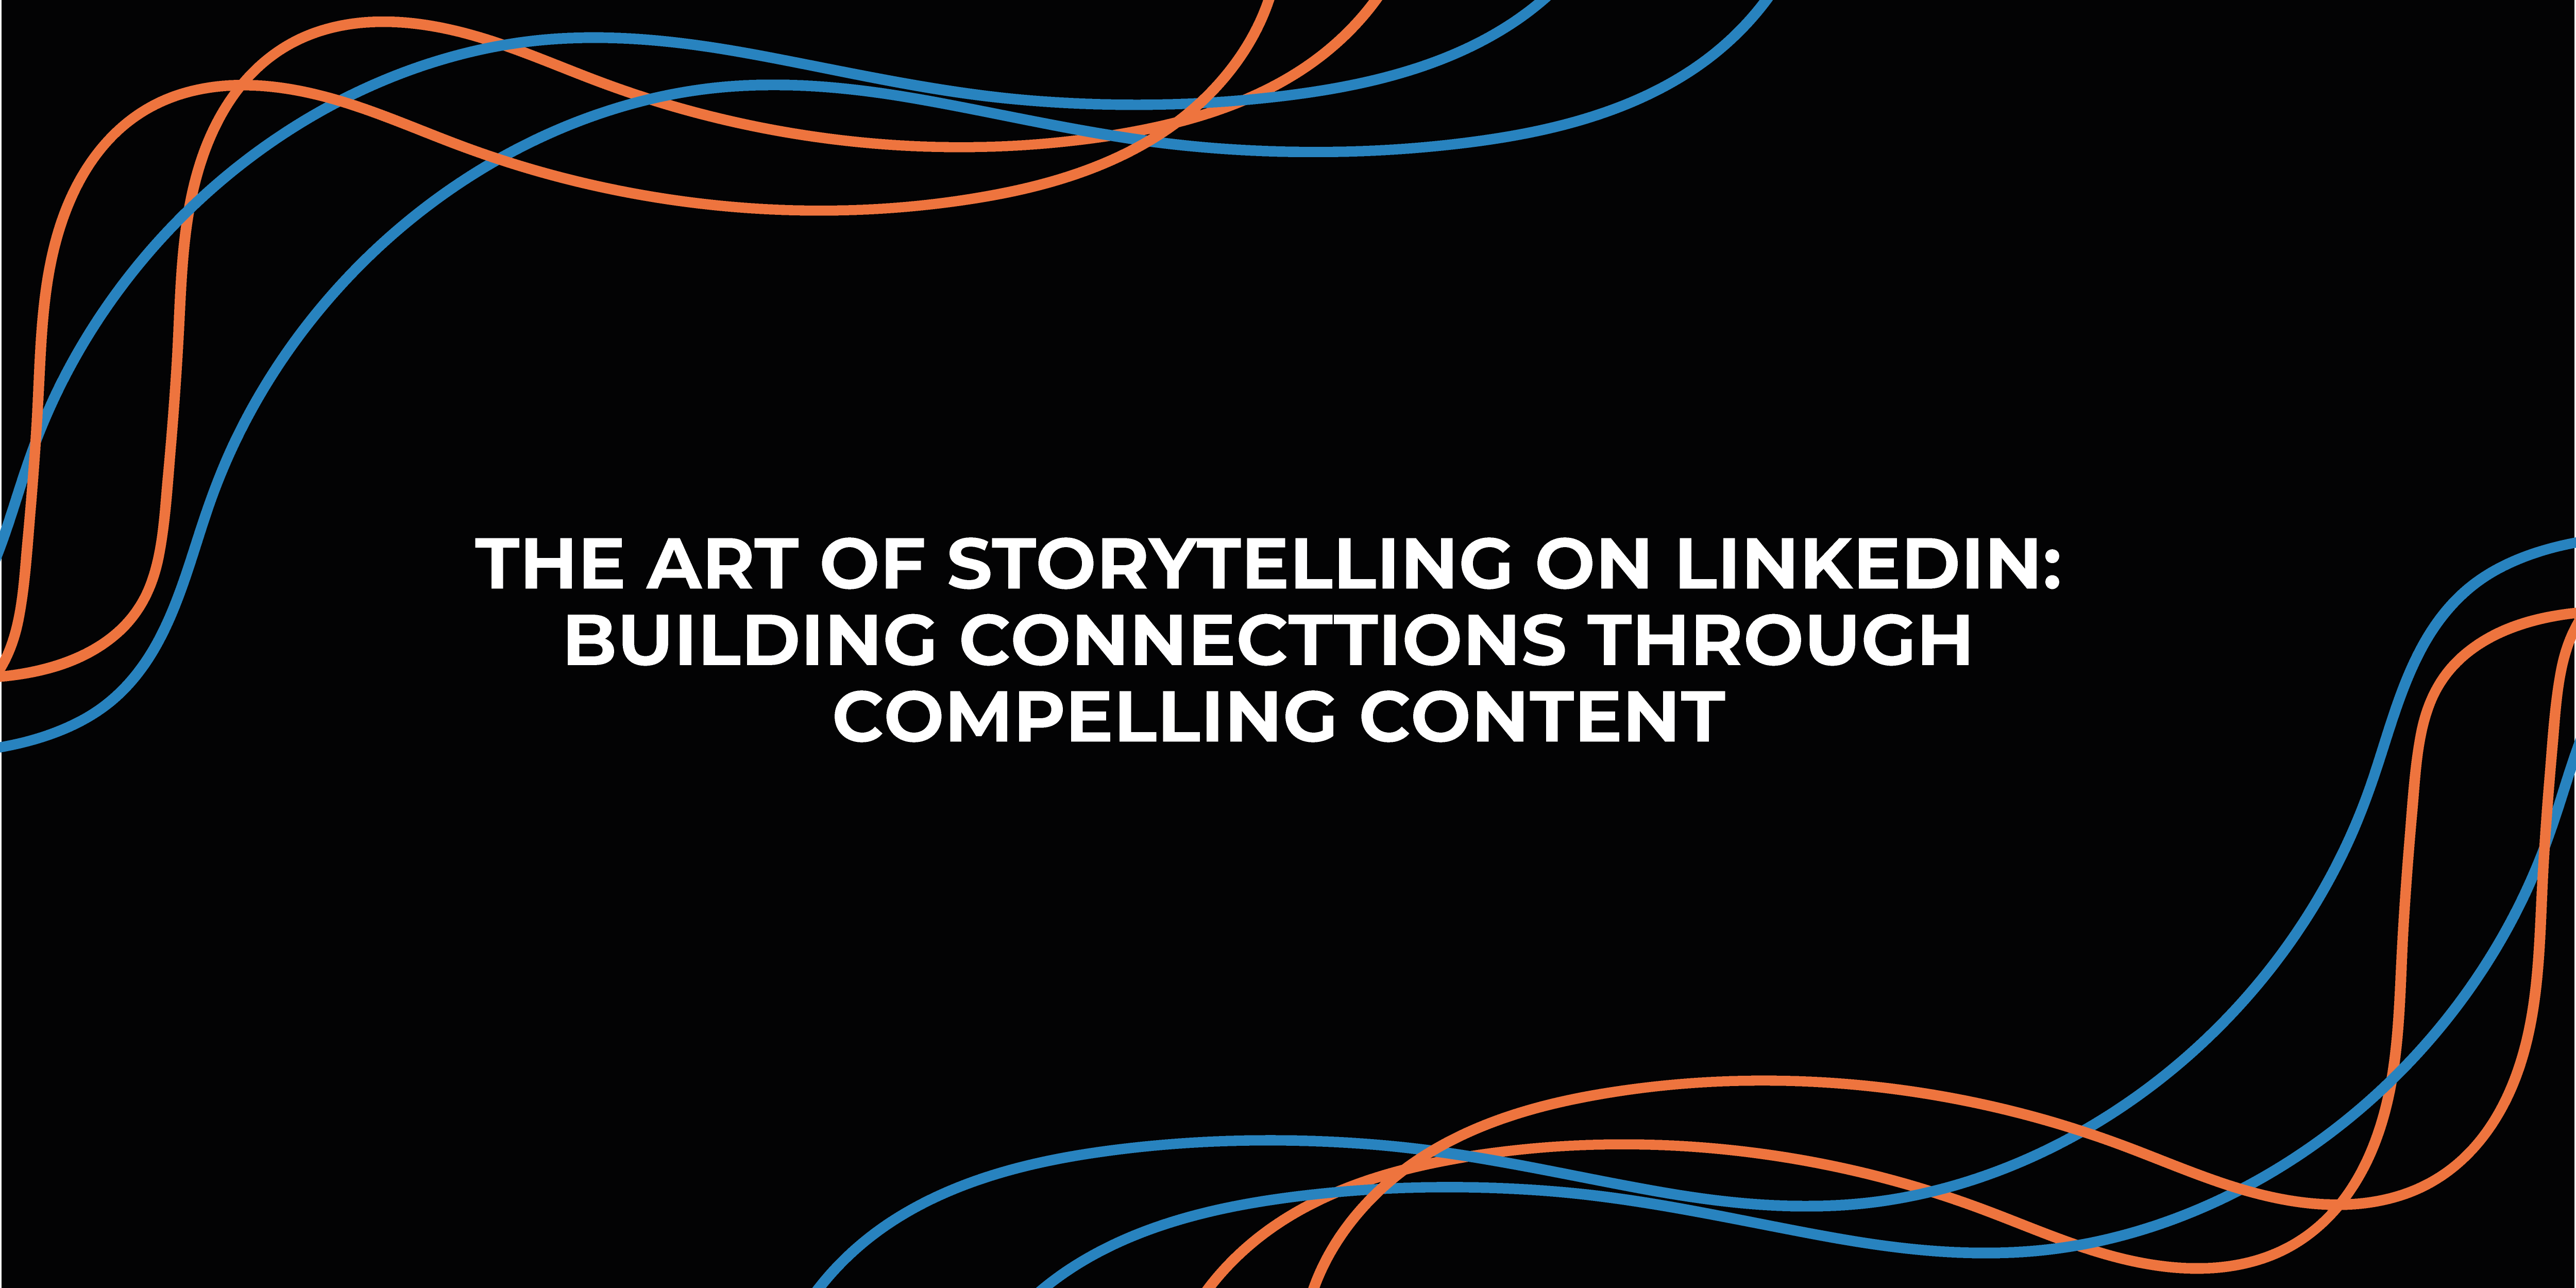 The Art of Storytelling on LinkedIn: Building Connections Through Compelling Content